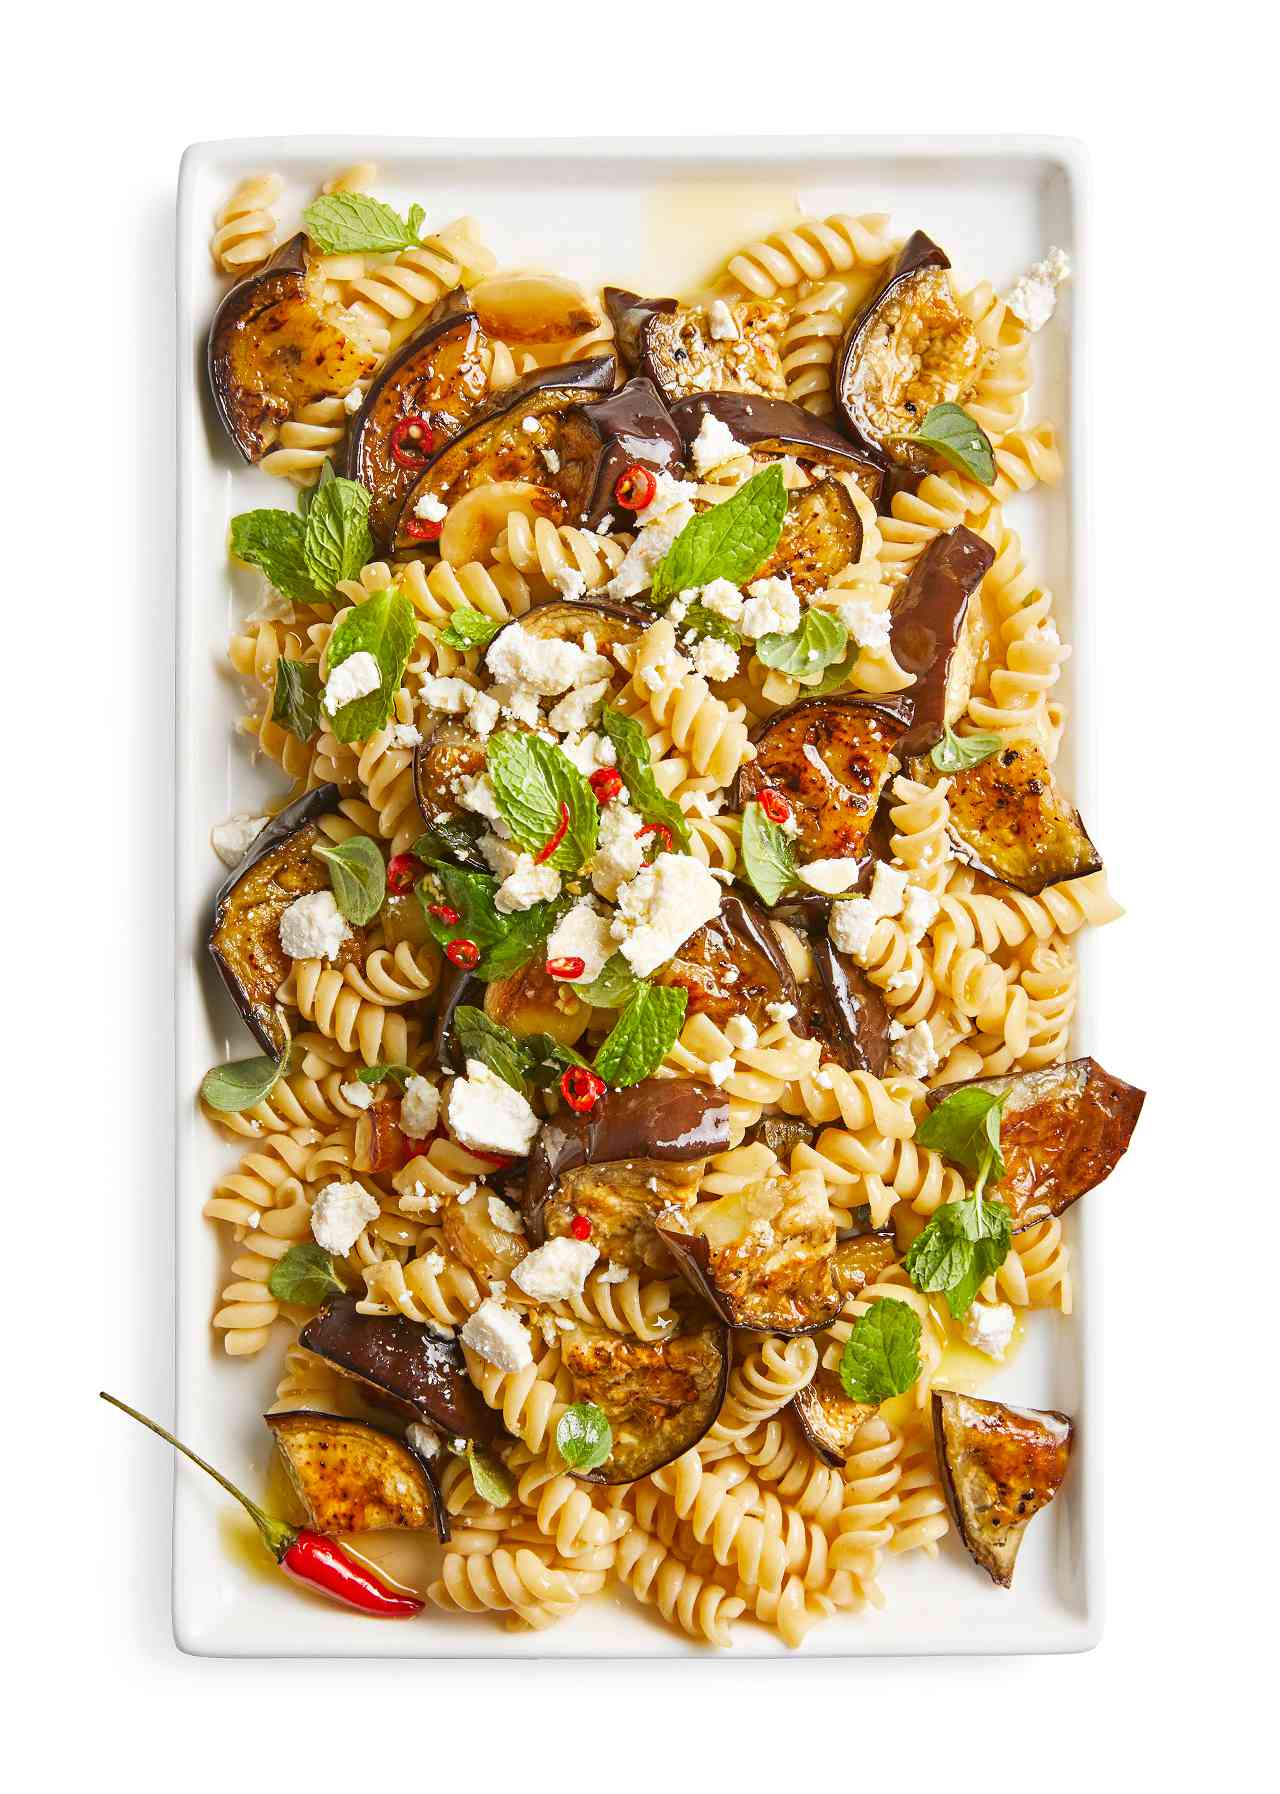 Eggplant, Garlic, and Herb Pasta on plate